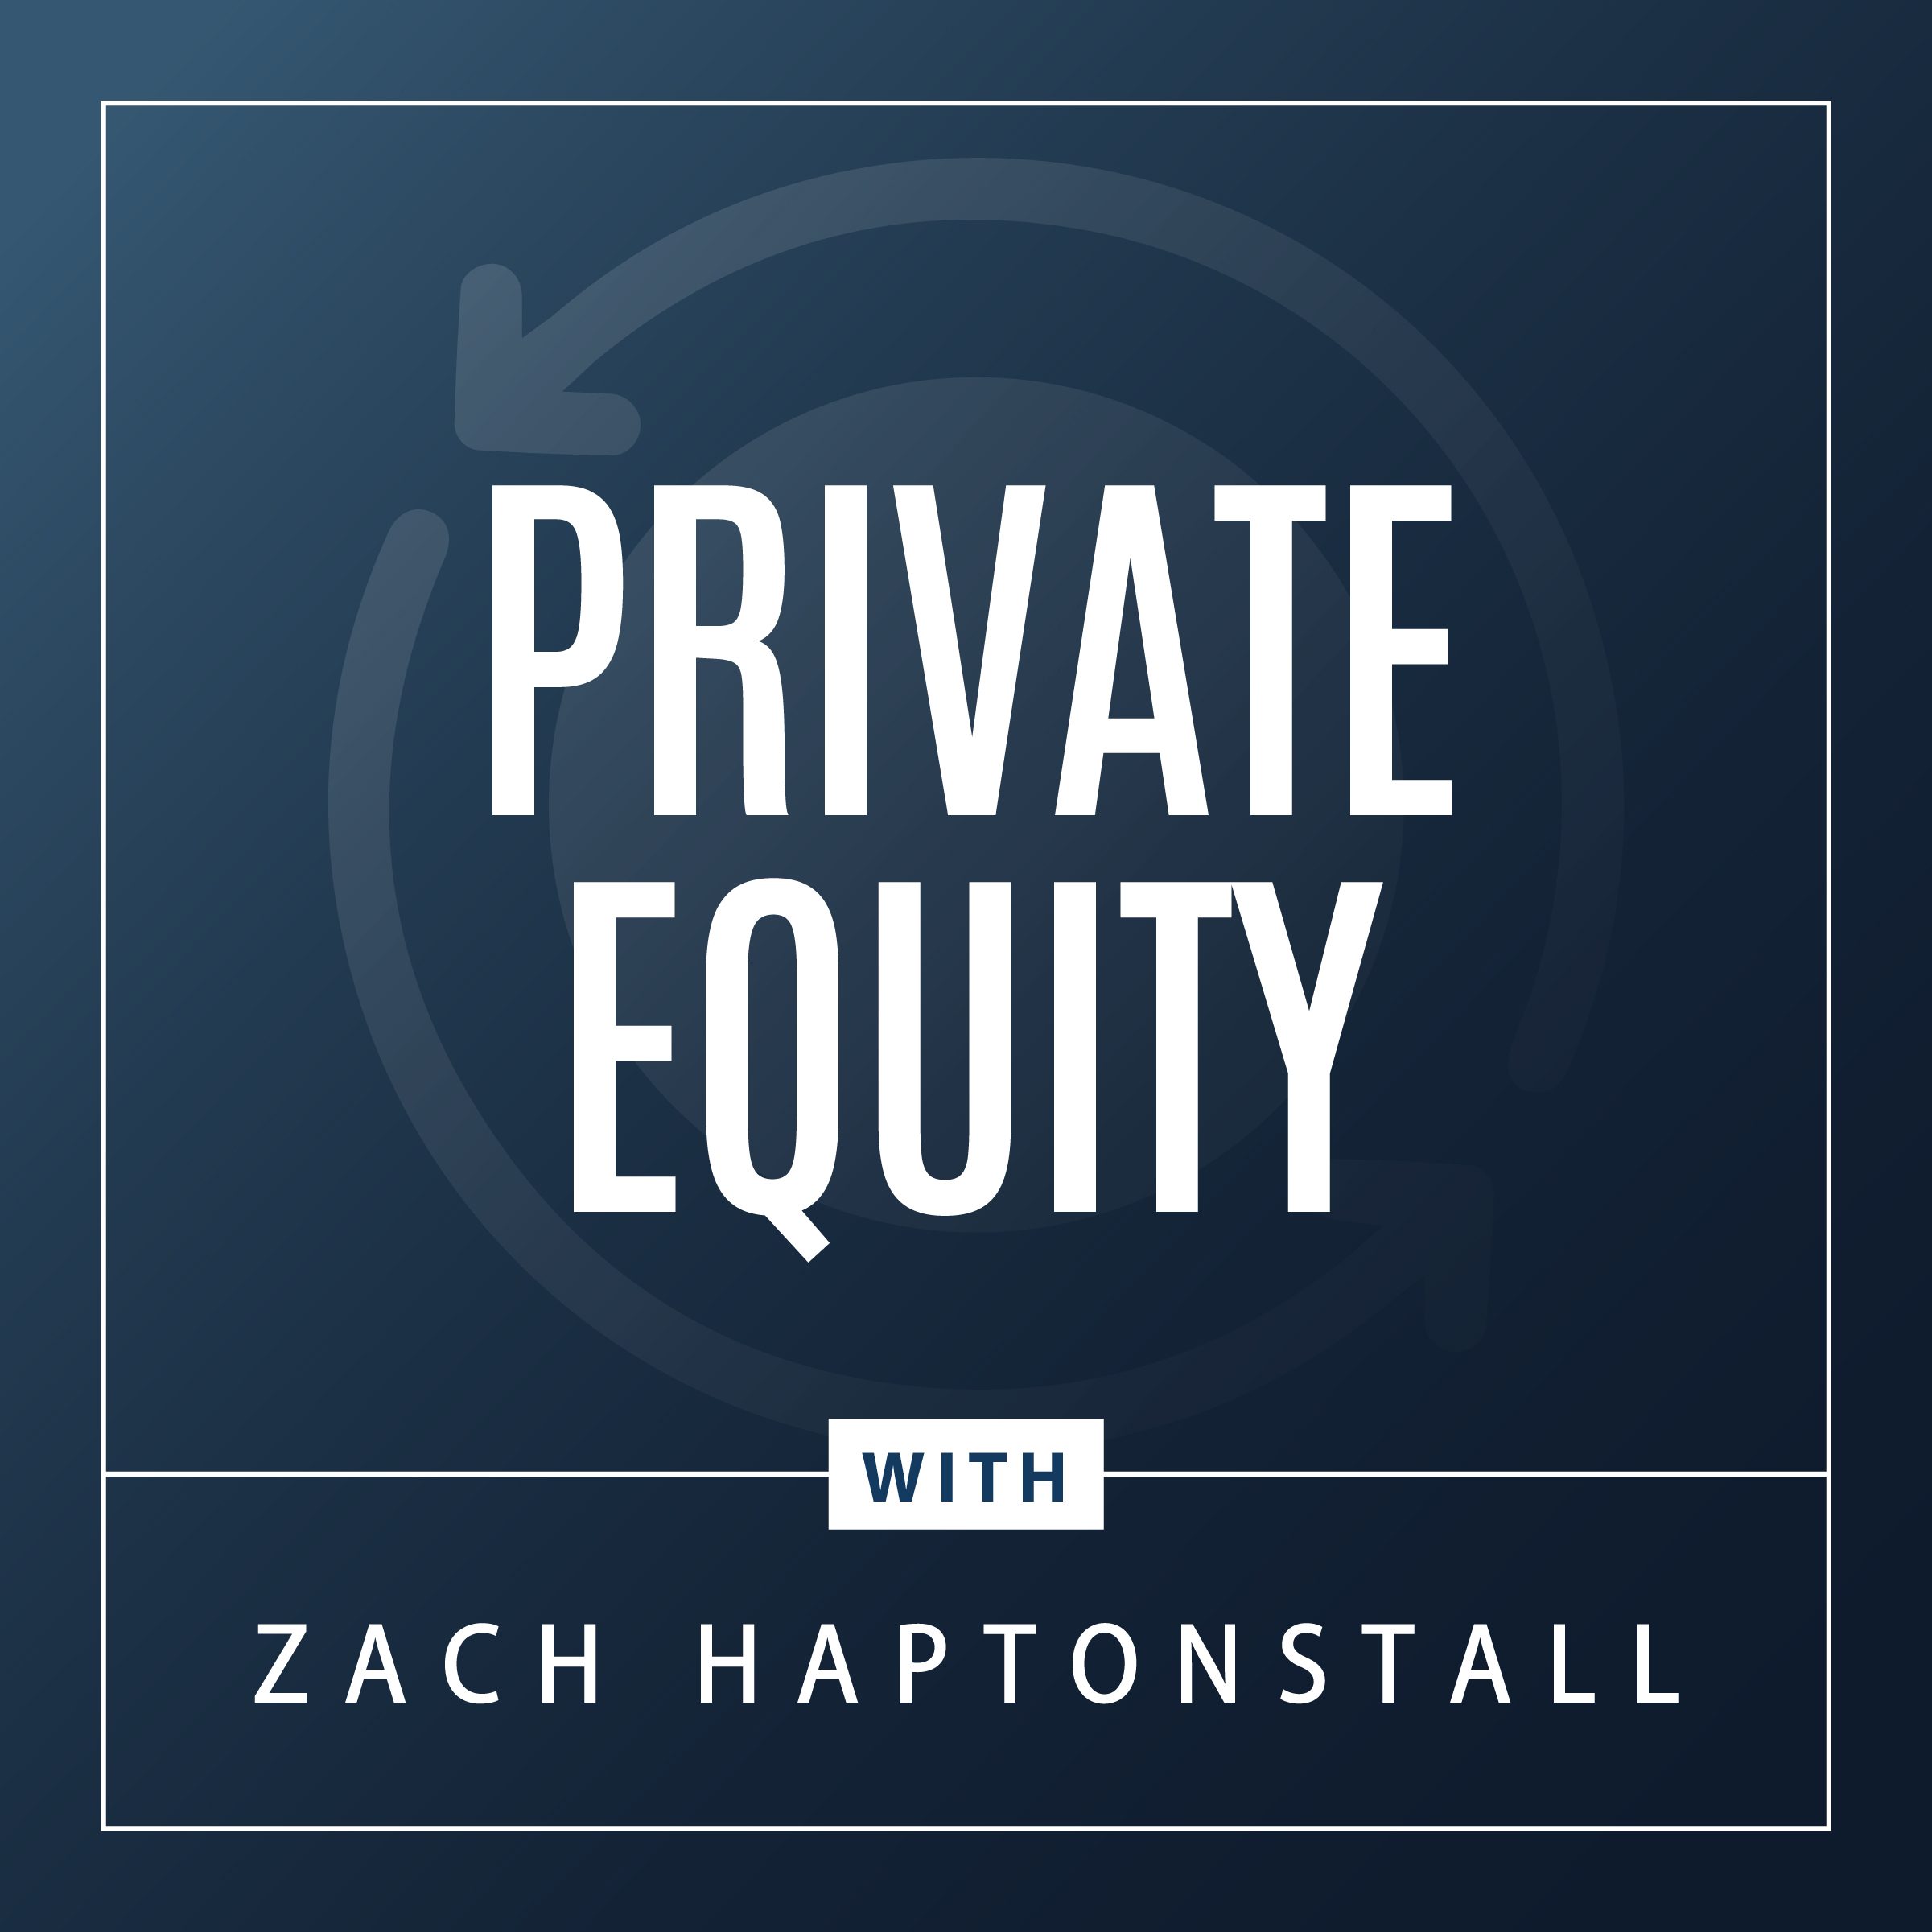 Watch to the Private Equity Video with Zach Haptonstall and Andrew McNair